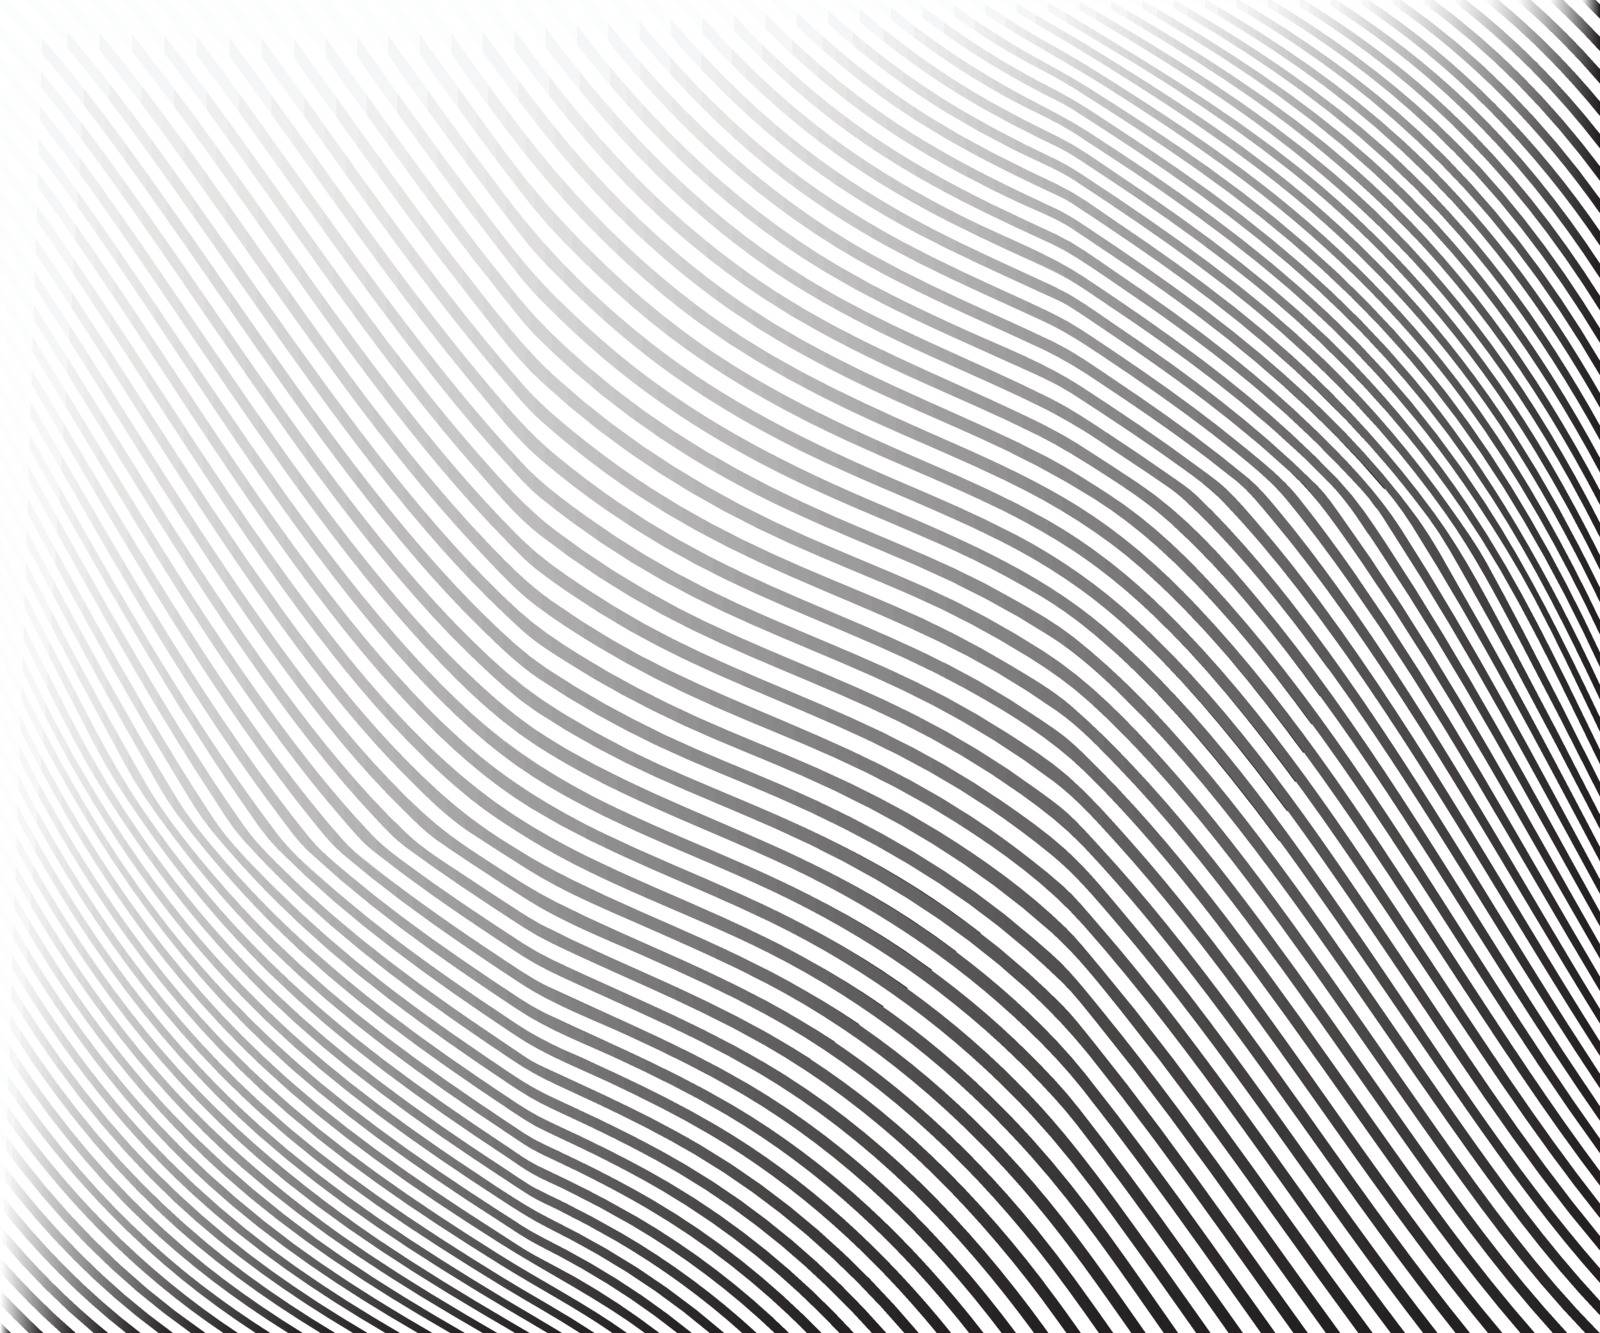 Wave Stripe Background - simple texture for your design. EPS10 vector